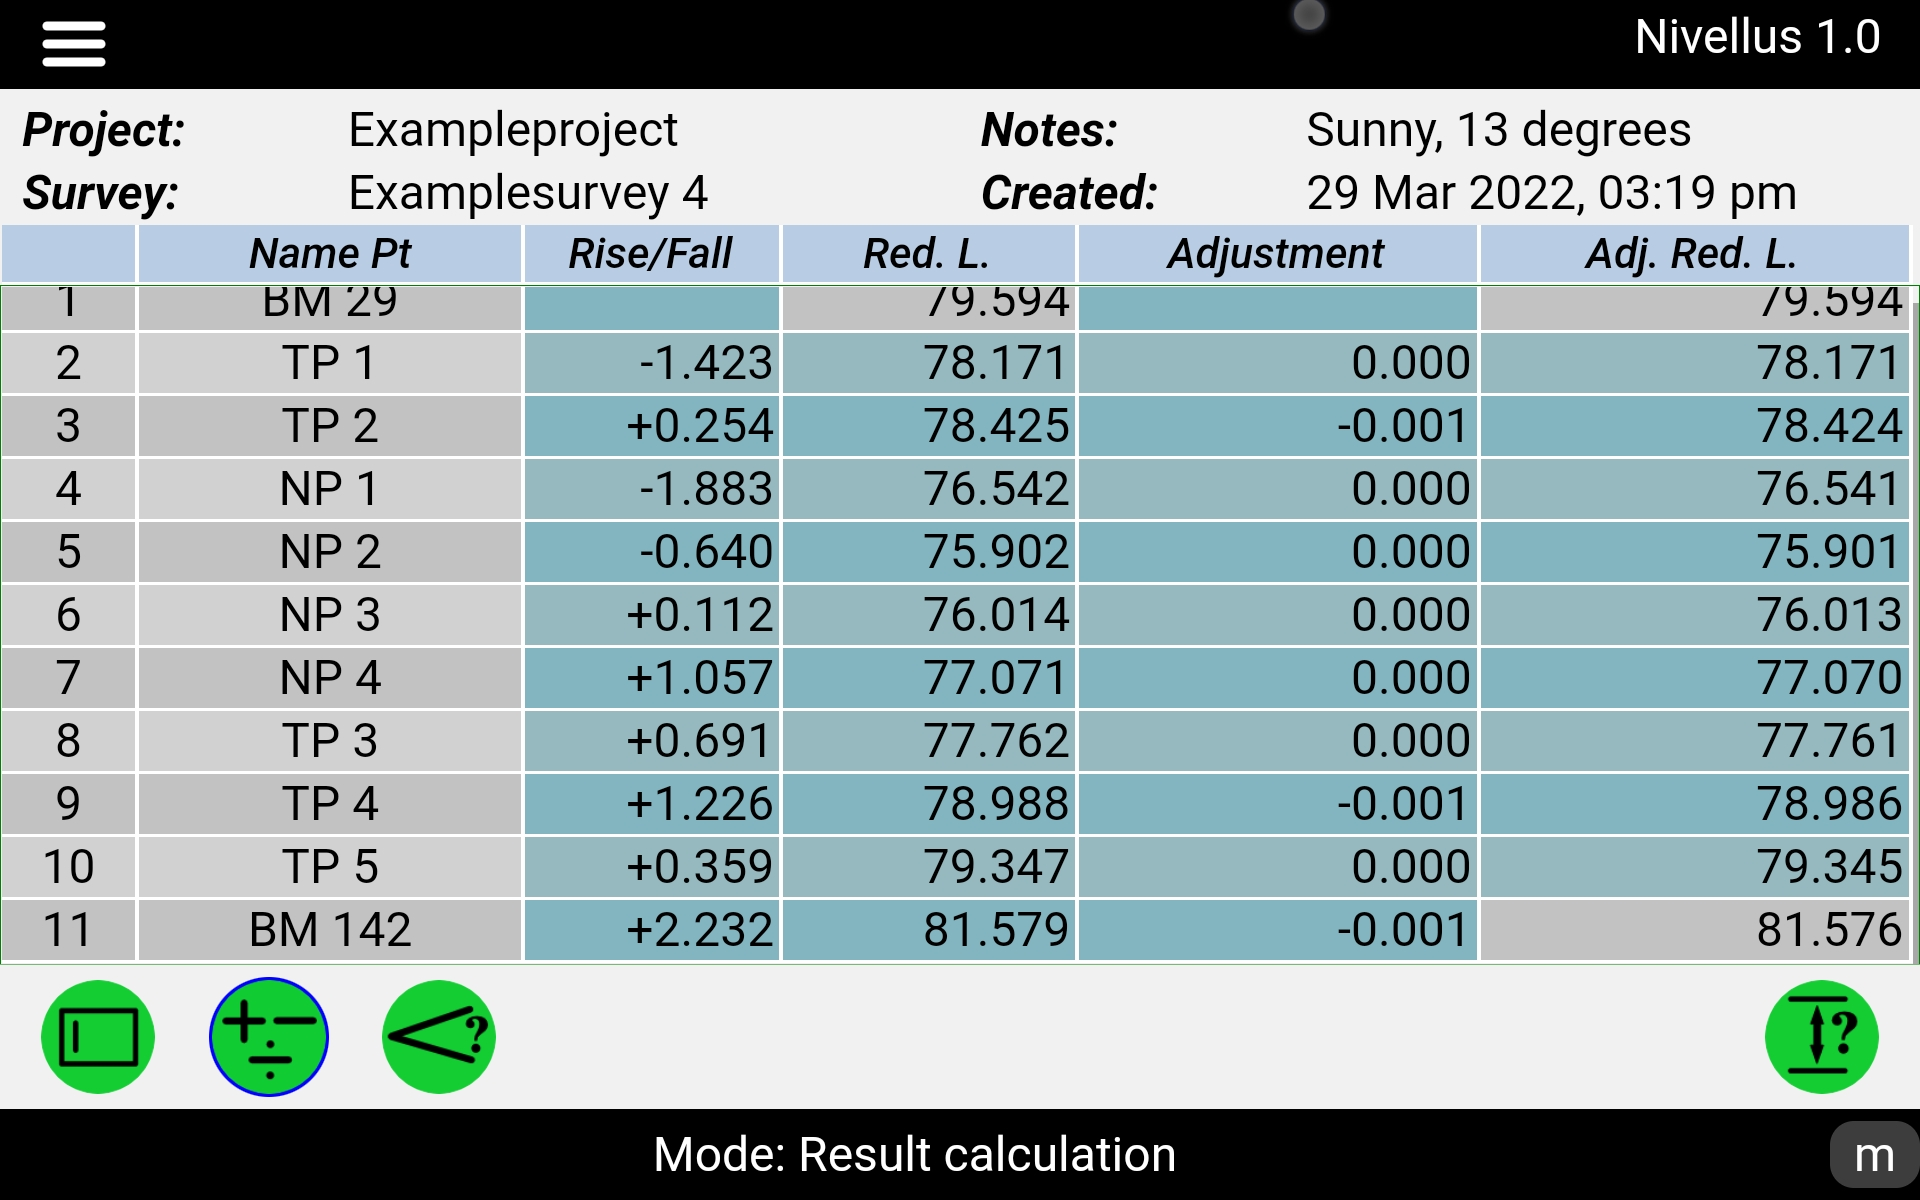 Nivellus - result calculation with reduced level, adjustment and adjusted reduced level